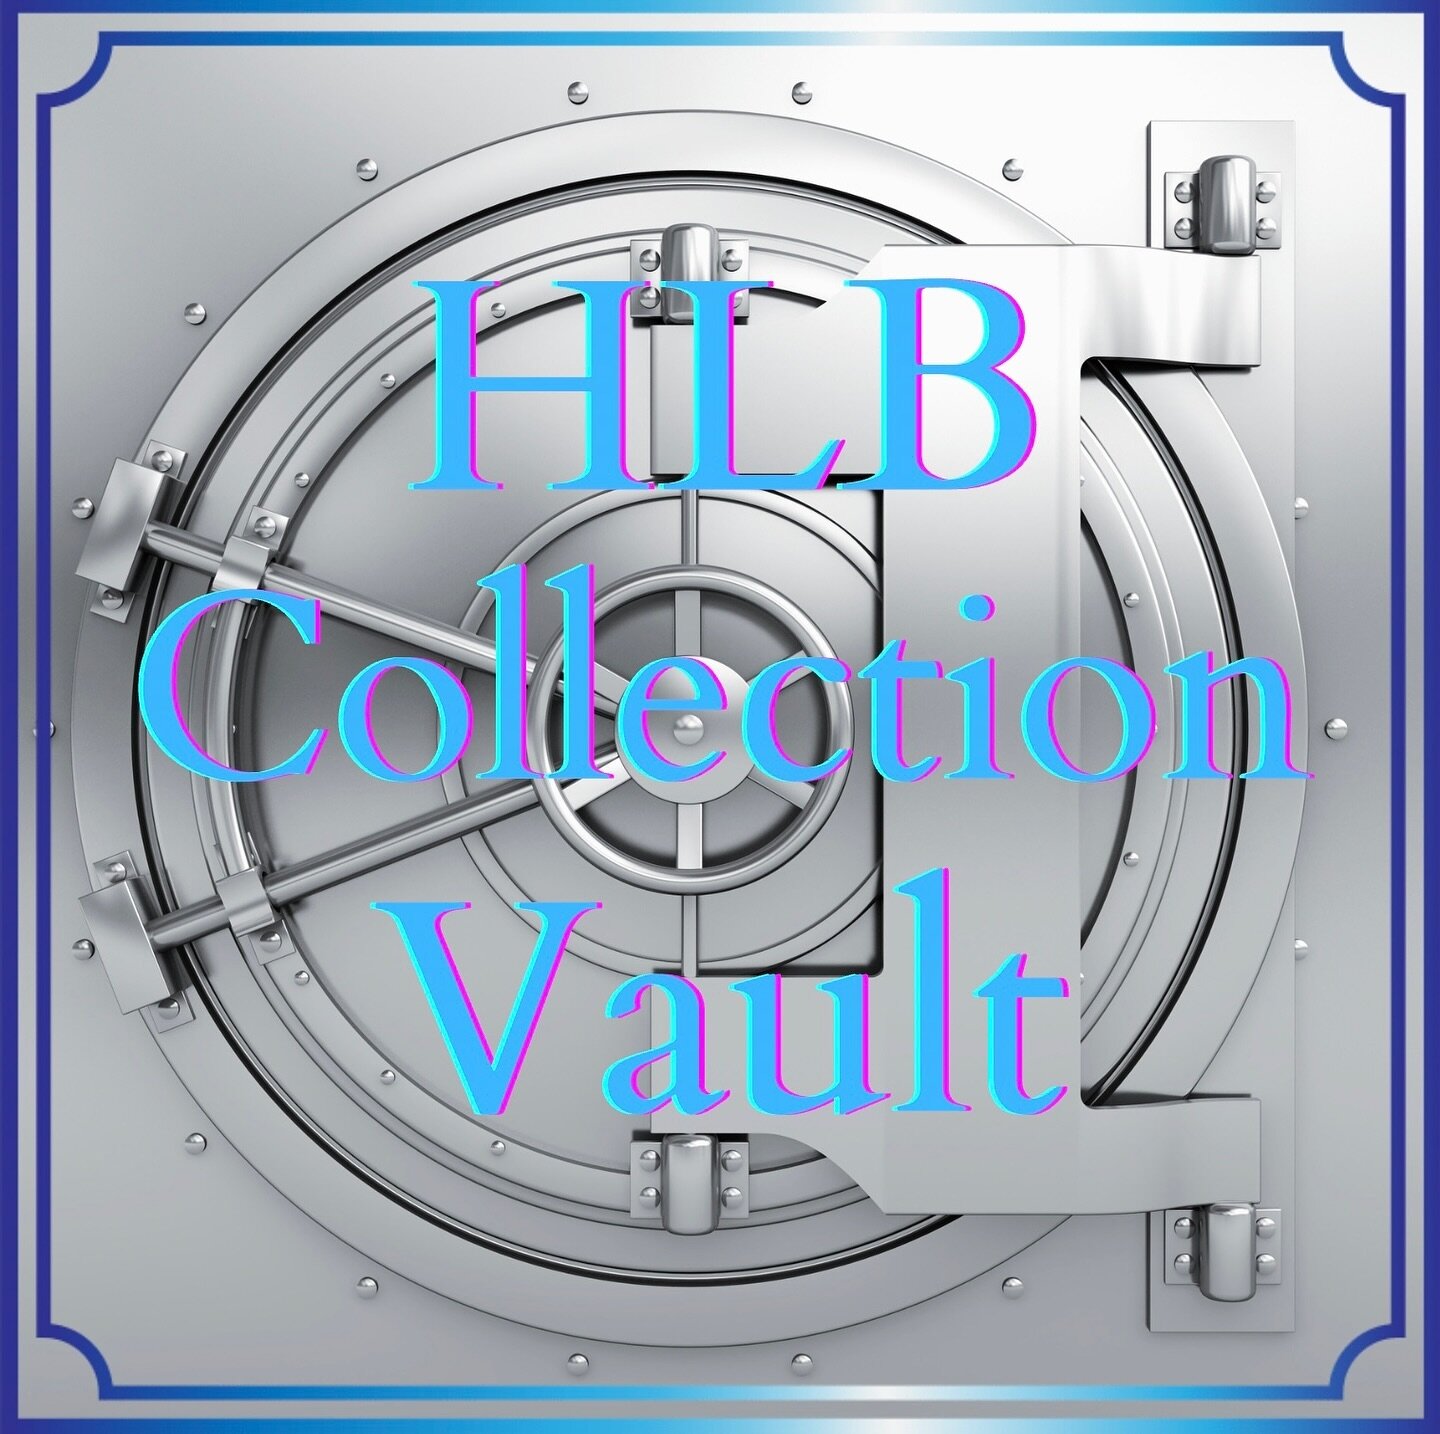 Explore the latest addition to our website: The HLB Collection Vault! Discover previously sold-out items that have been in high demand. To inquire or join the waitlist for a specific piece, visit the item in the Vault to sign up for updates. Keep an 